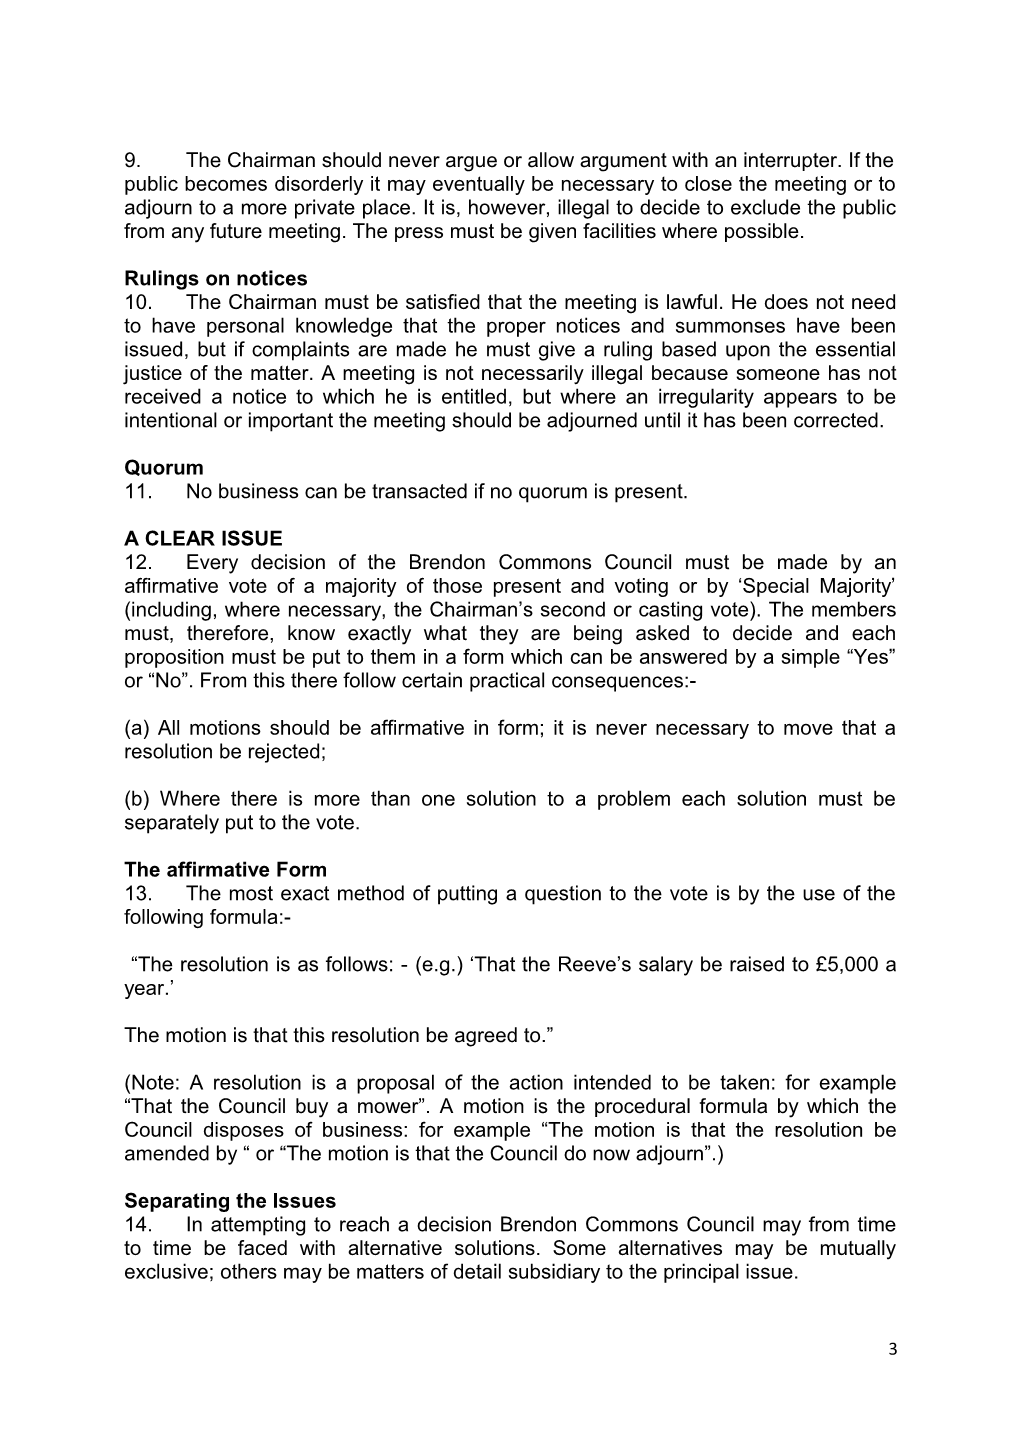 Standing Orders of Brendon Commons Council